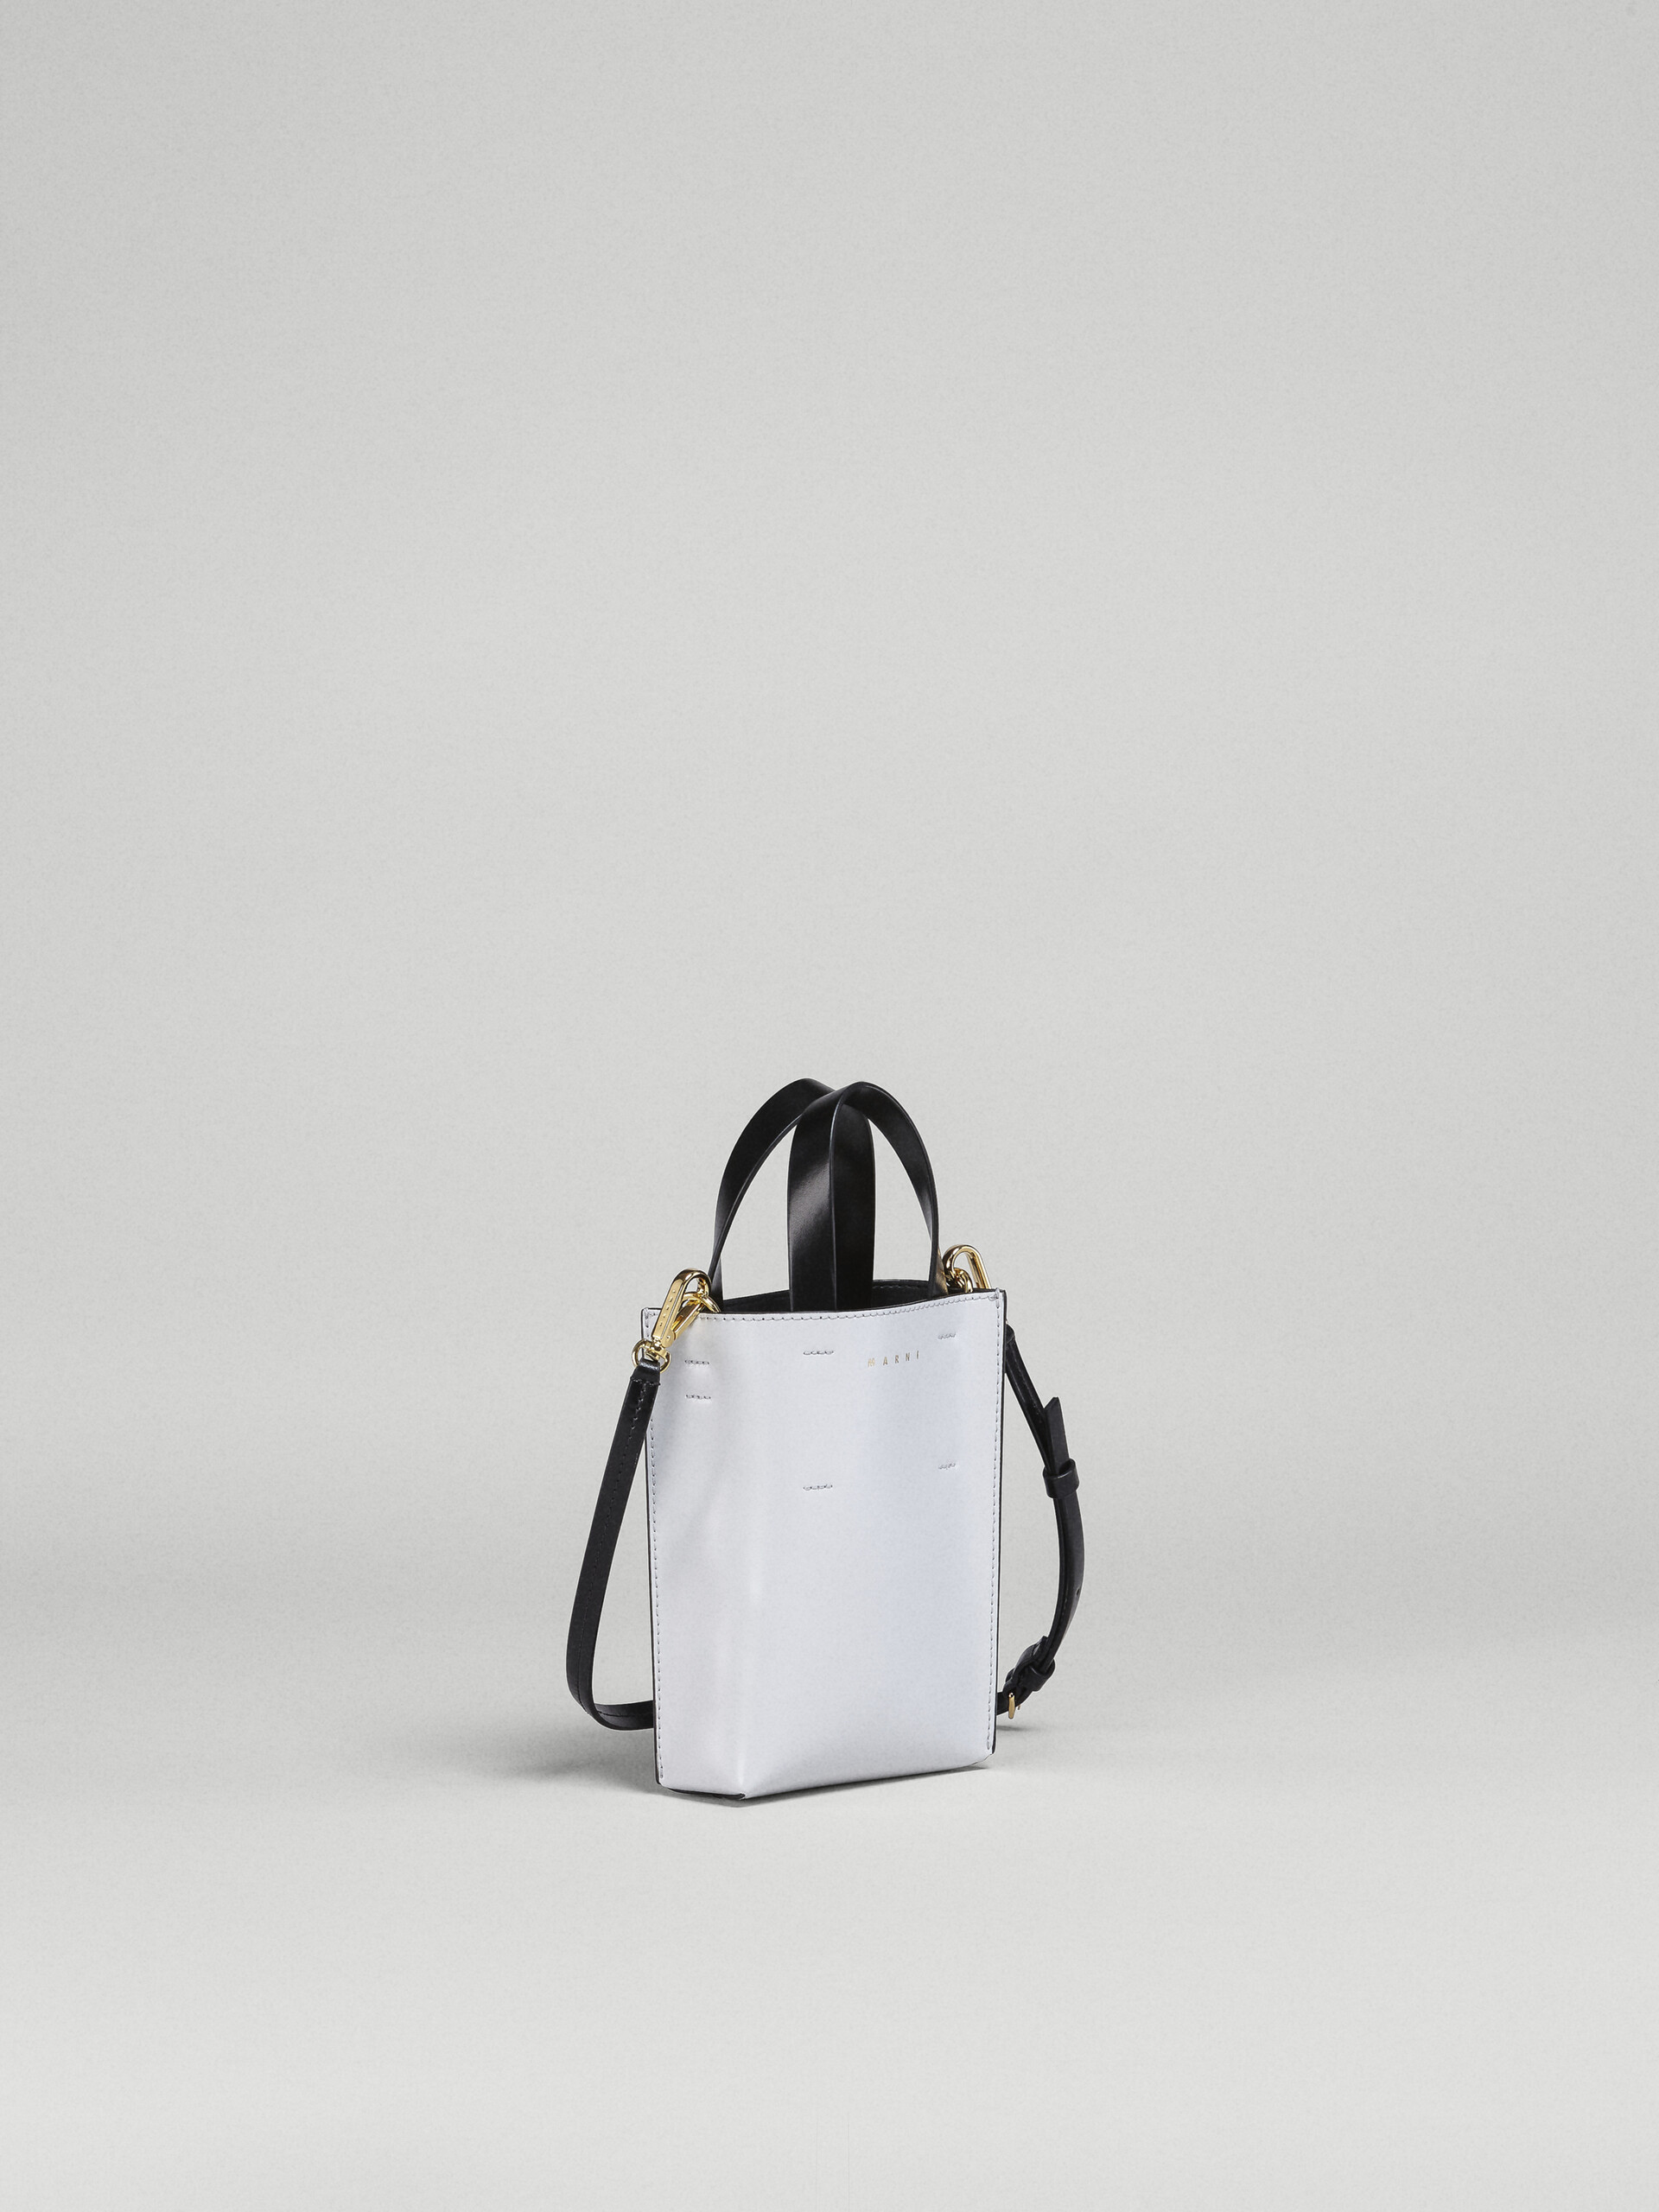 White and black polished leather nano MUSEO tote bag - Shopping Bags - Image 5